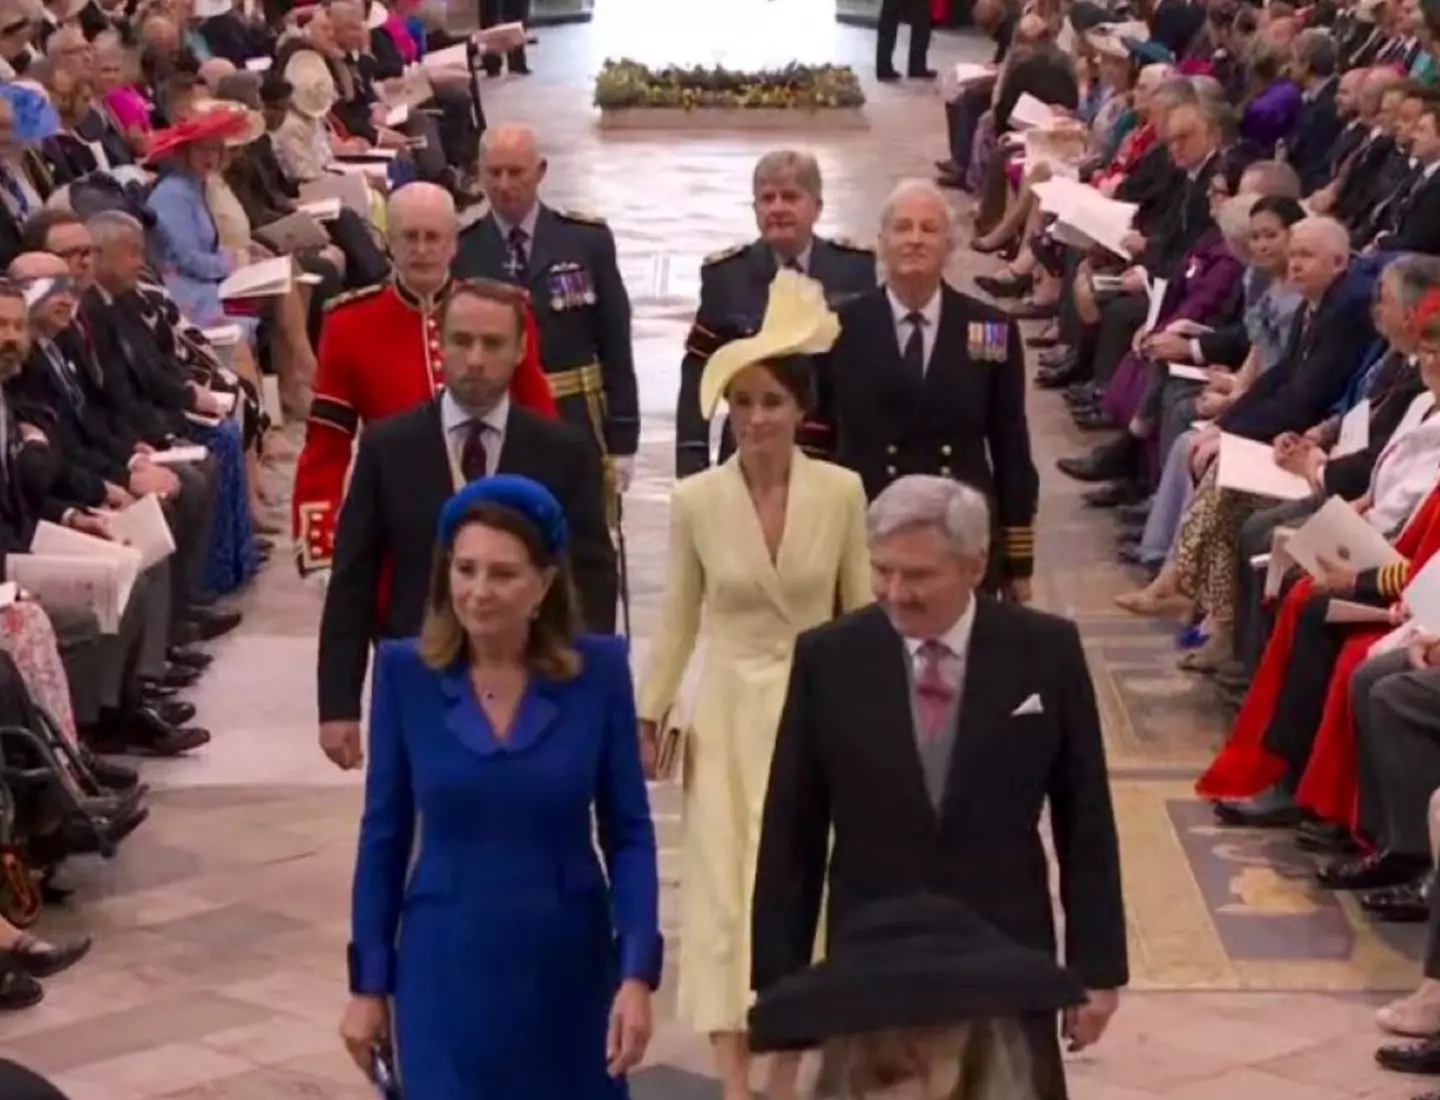 Some guests have been spotted chewing gum at the coronation.